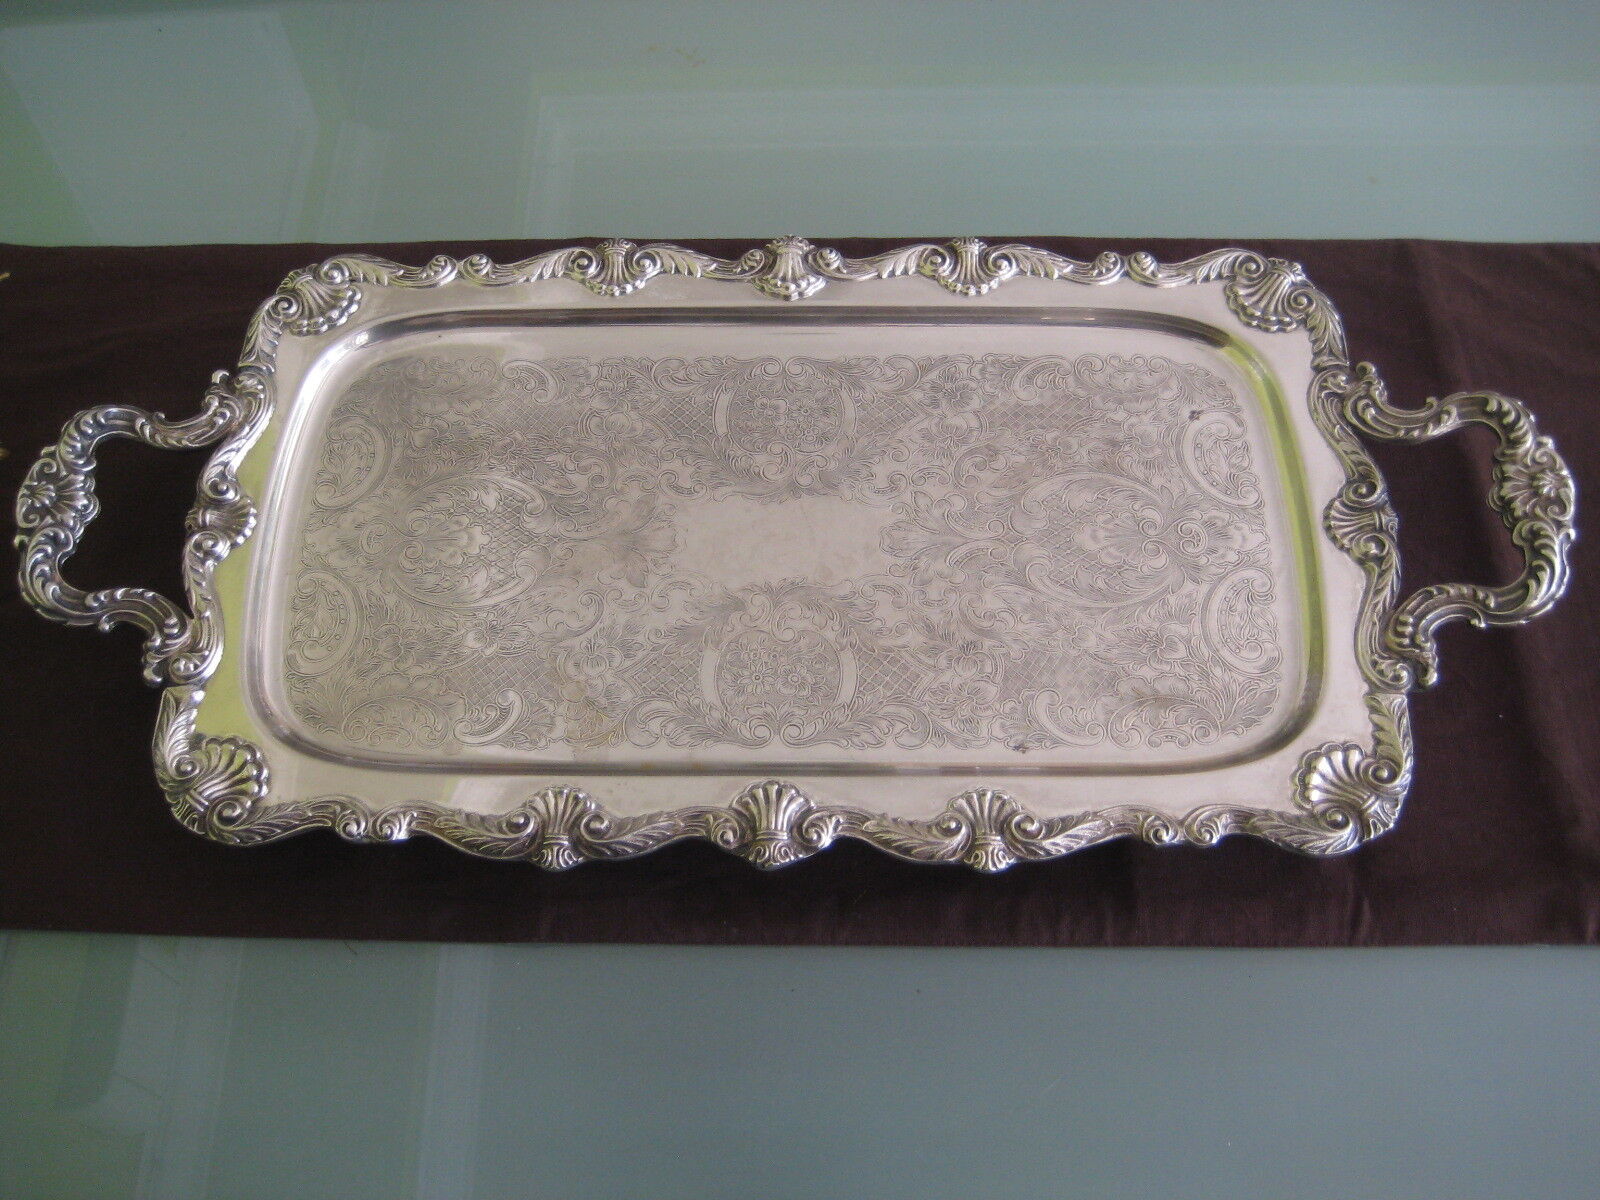 VINTAGE ENGLISH SILVER MFG CORP SILVER PLATE FOOTED SERVING PLATE, MADE IN USA